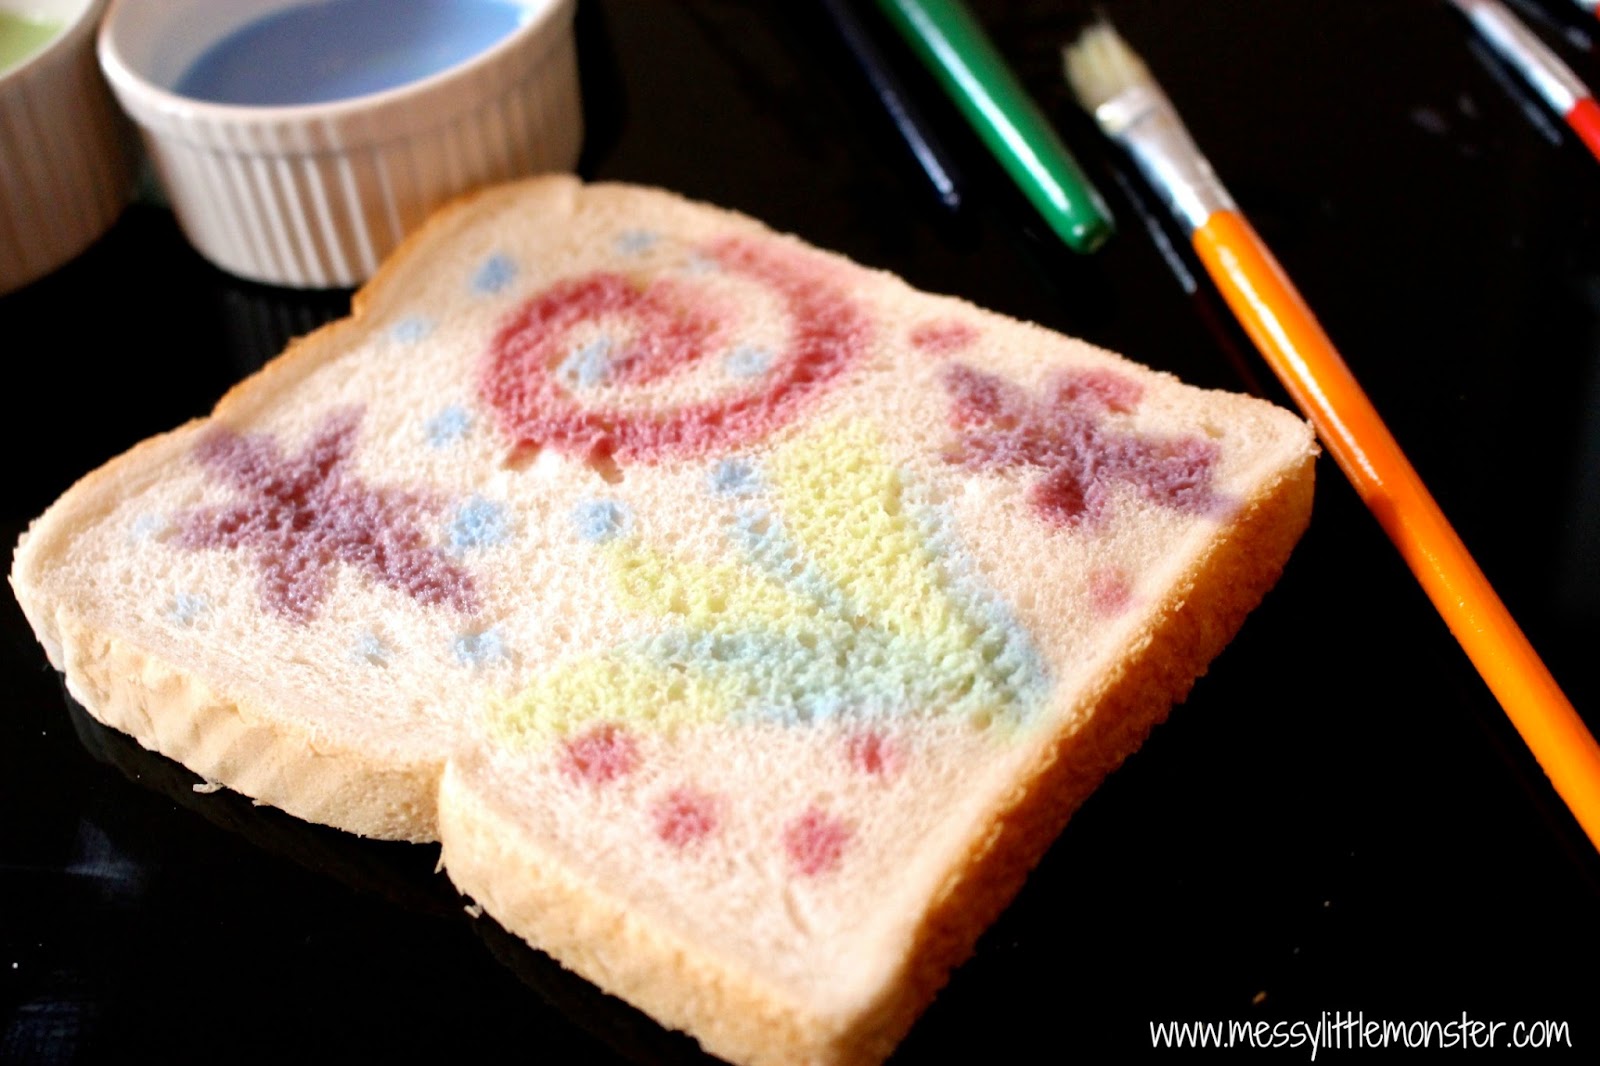 Painted firework toast.  a simple edible paint recipe.  paint firework designs to celebrate bonfire night or new year